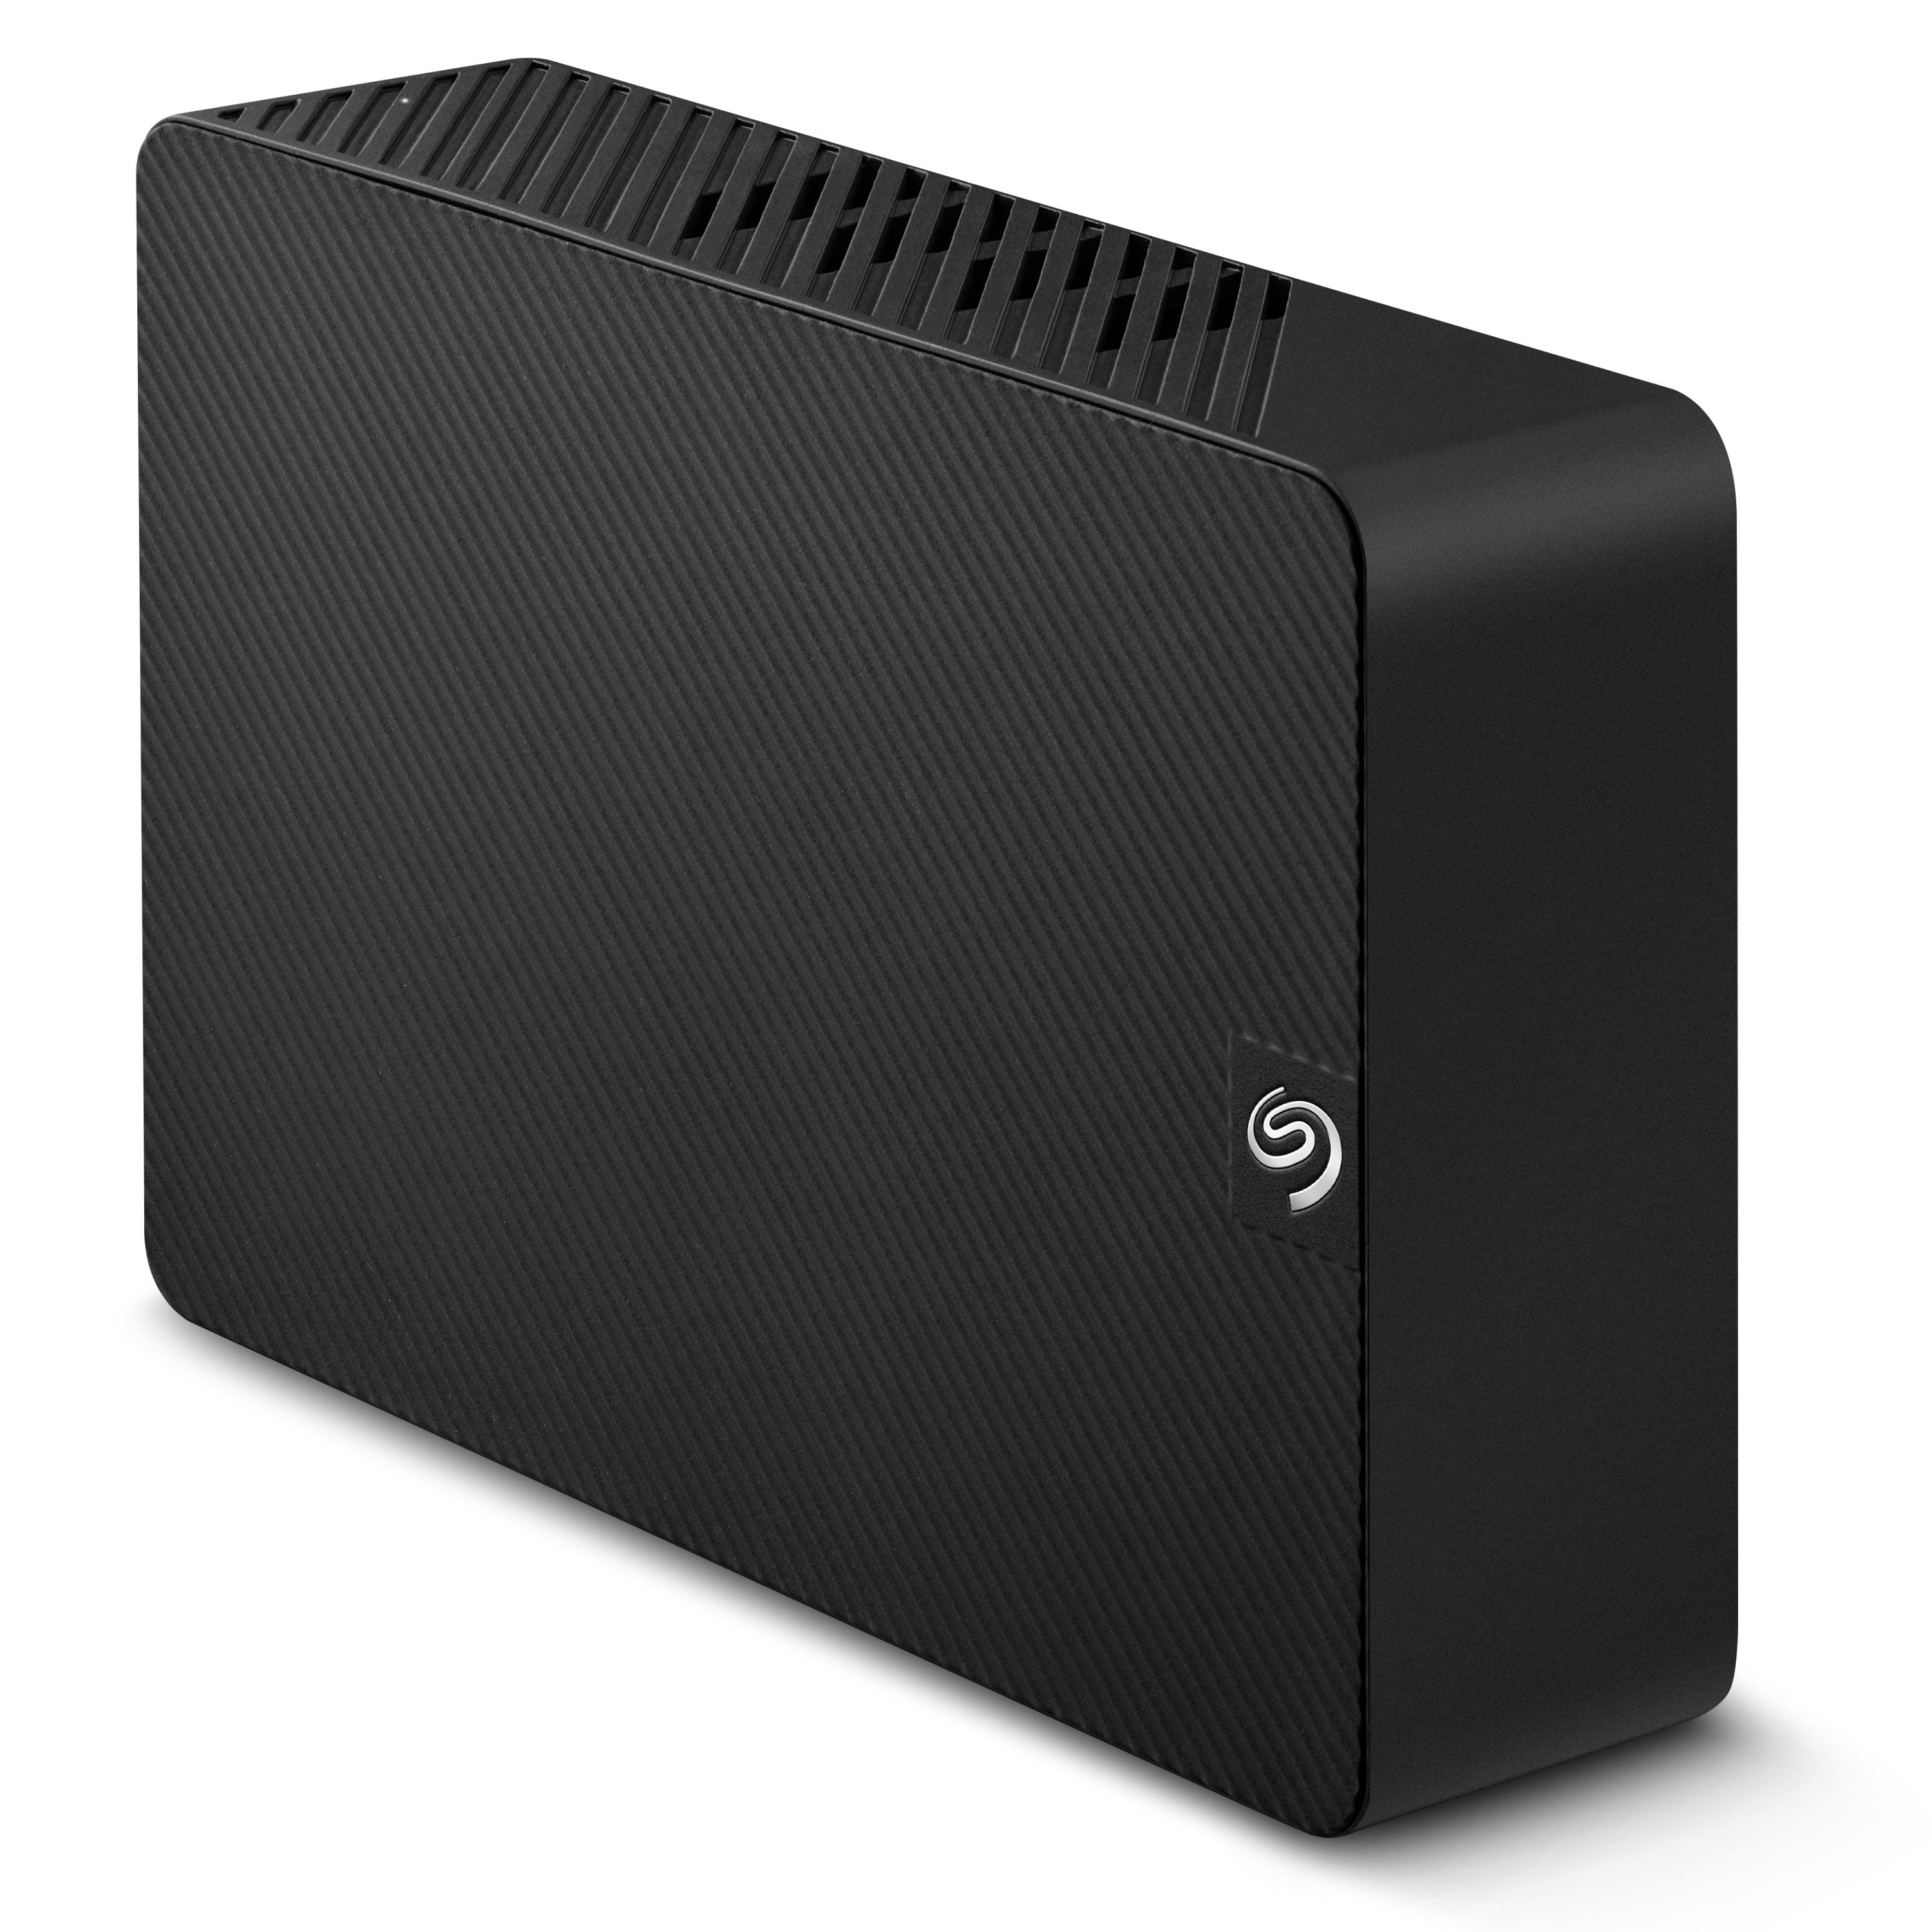 Perversion ydre dessert Seagate ExpansionPLUS 8TB External Hard Drive HDD - USB 3.0 with Rescue  Data Recovery Services and Tooolkit Backup Software (STKR8000400) -  Walmart.com